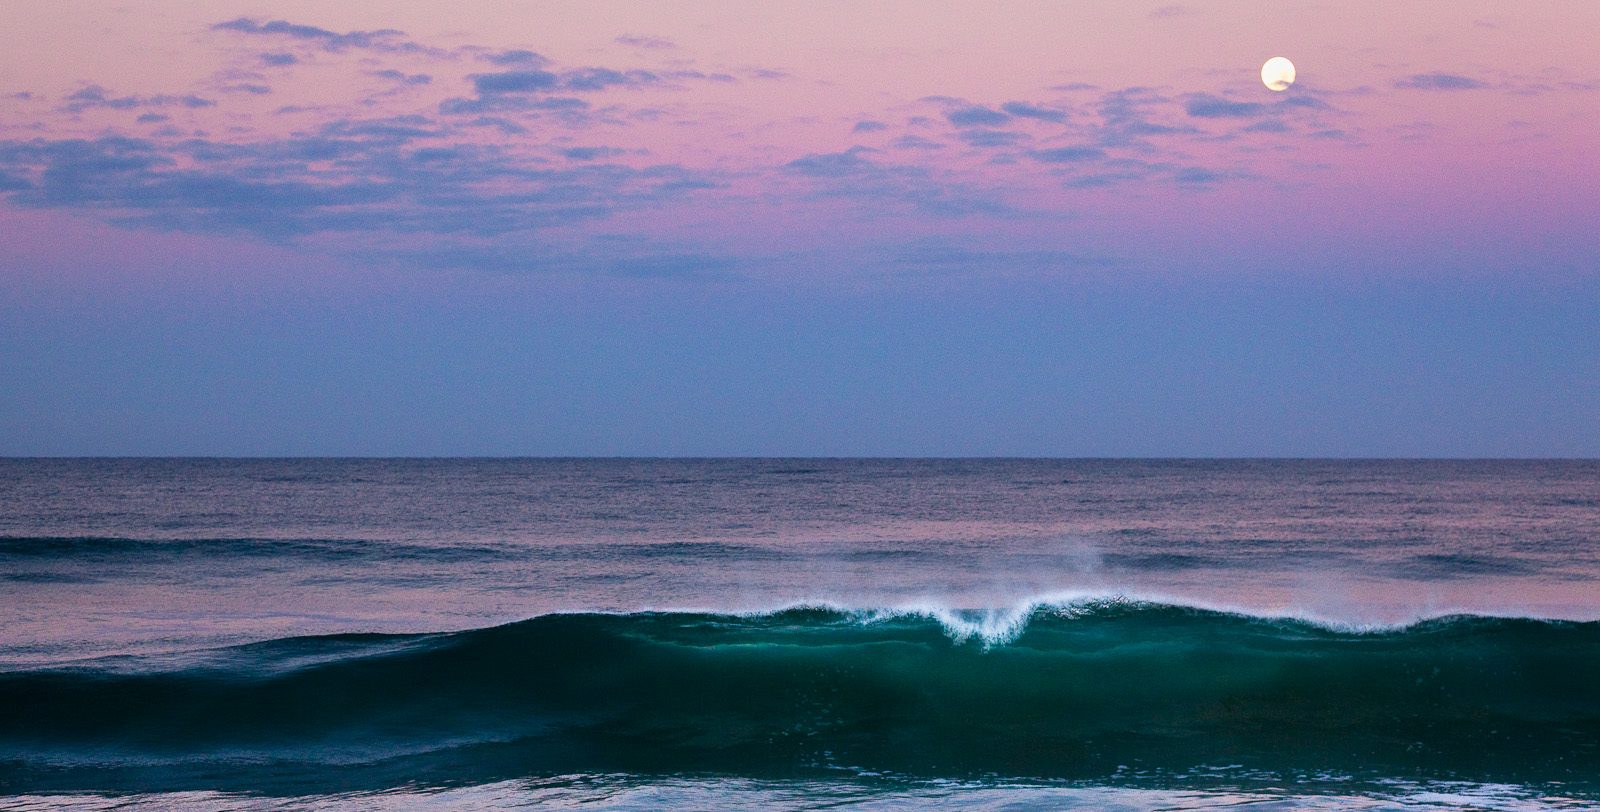 A full moon above a wave just before sunrise on the beach in front of Rancho Pescadero near Todos Santos, Baja.